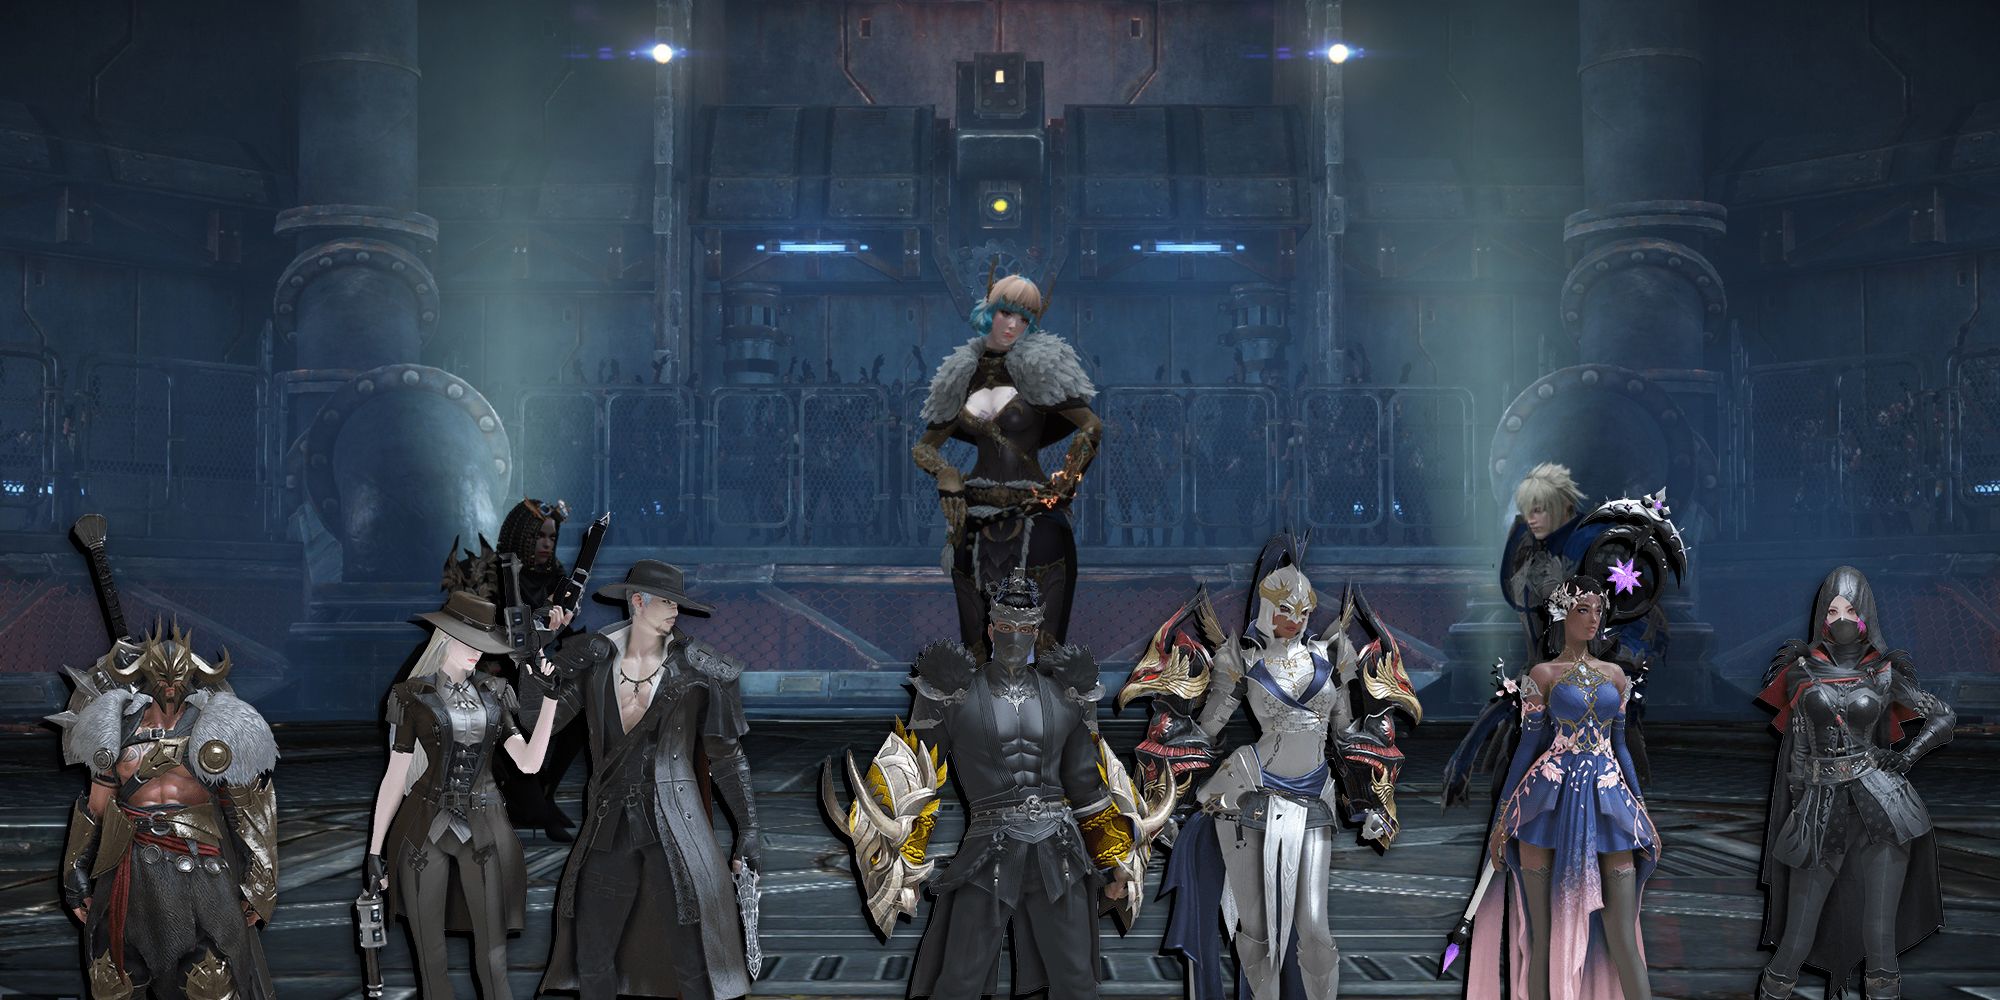 Lost Ark - Two Teammates Kneeling Towards The Third With All The Playable Class PNGs Overlaid On Top